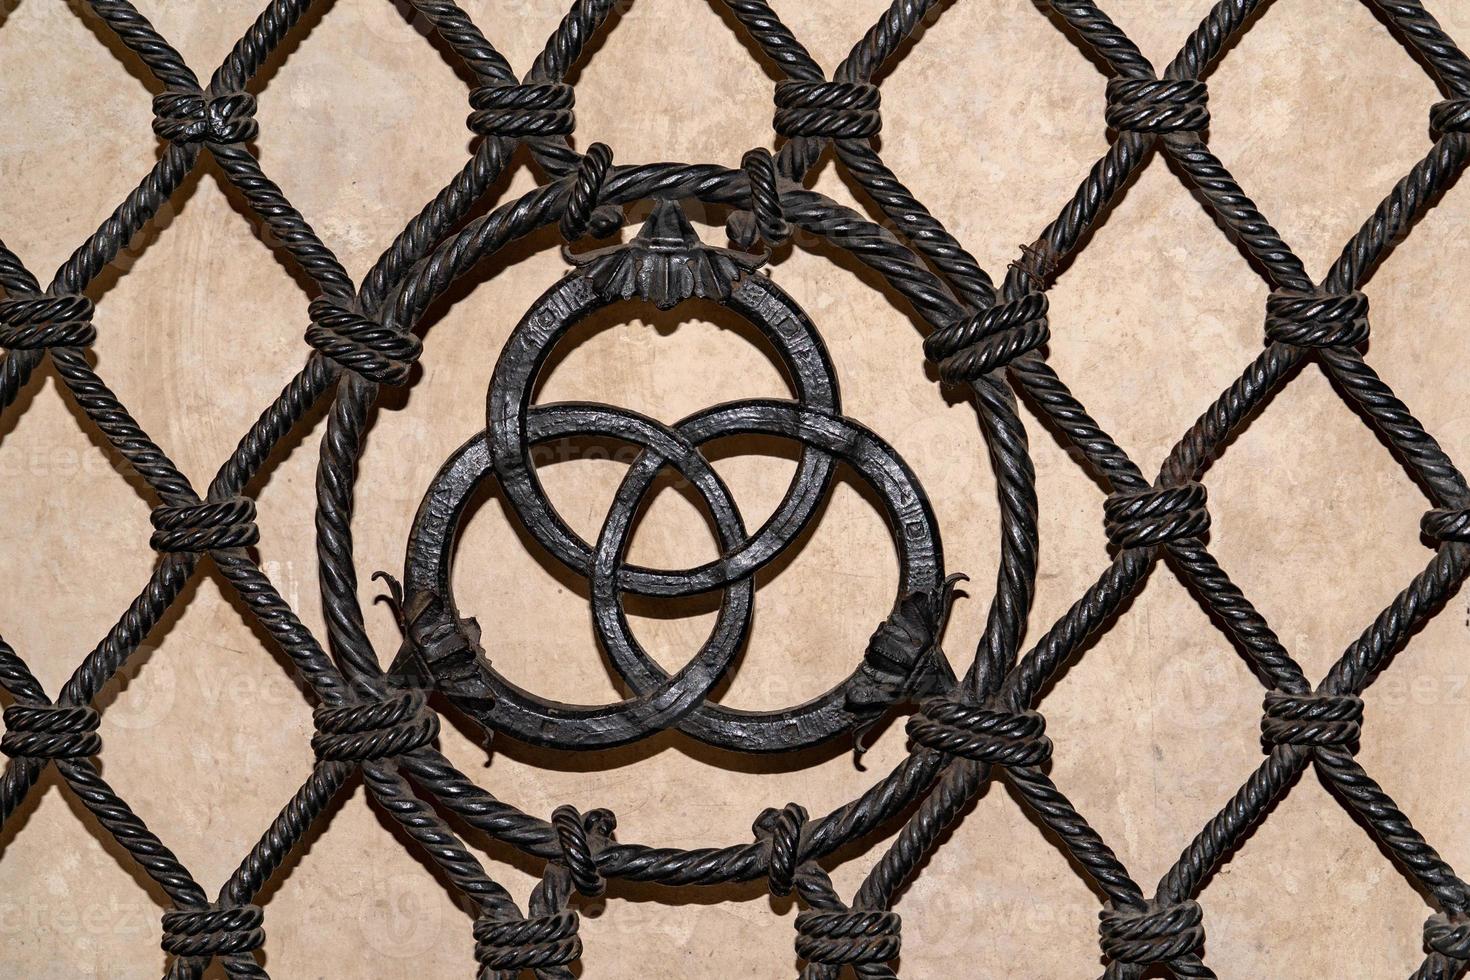 iron rings woven interwined gate medici symbol in florence photo